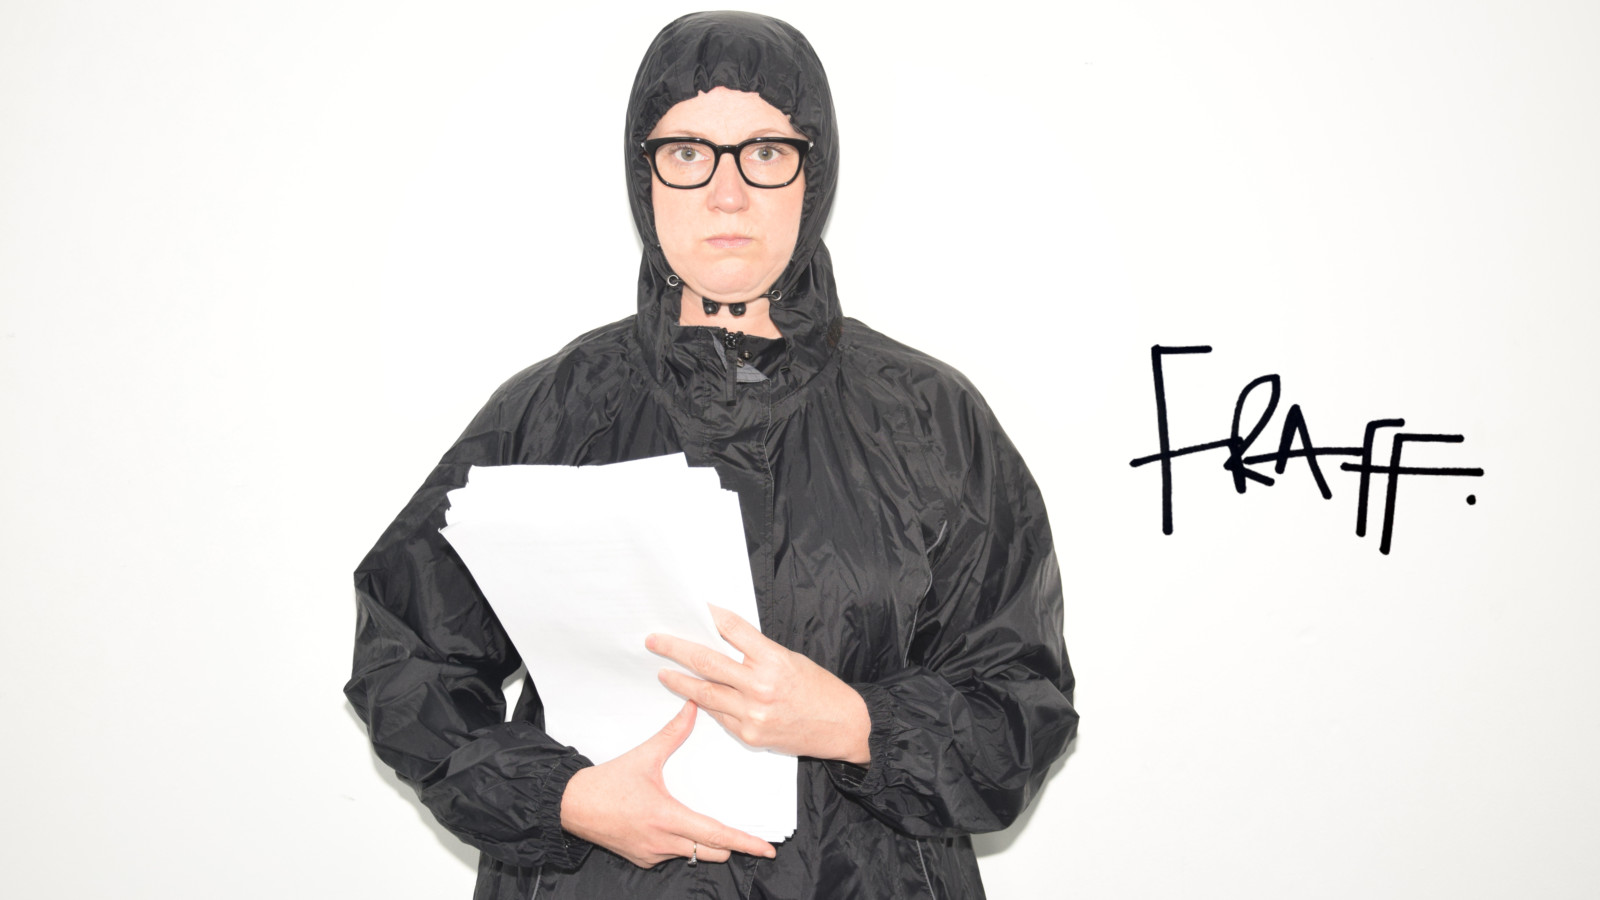 The artist Barbara Brownskirt stands in a black anorak with the hood up and holding a stack of white papers against a white background. The word 'FRAFF' is written on the background.